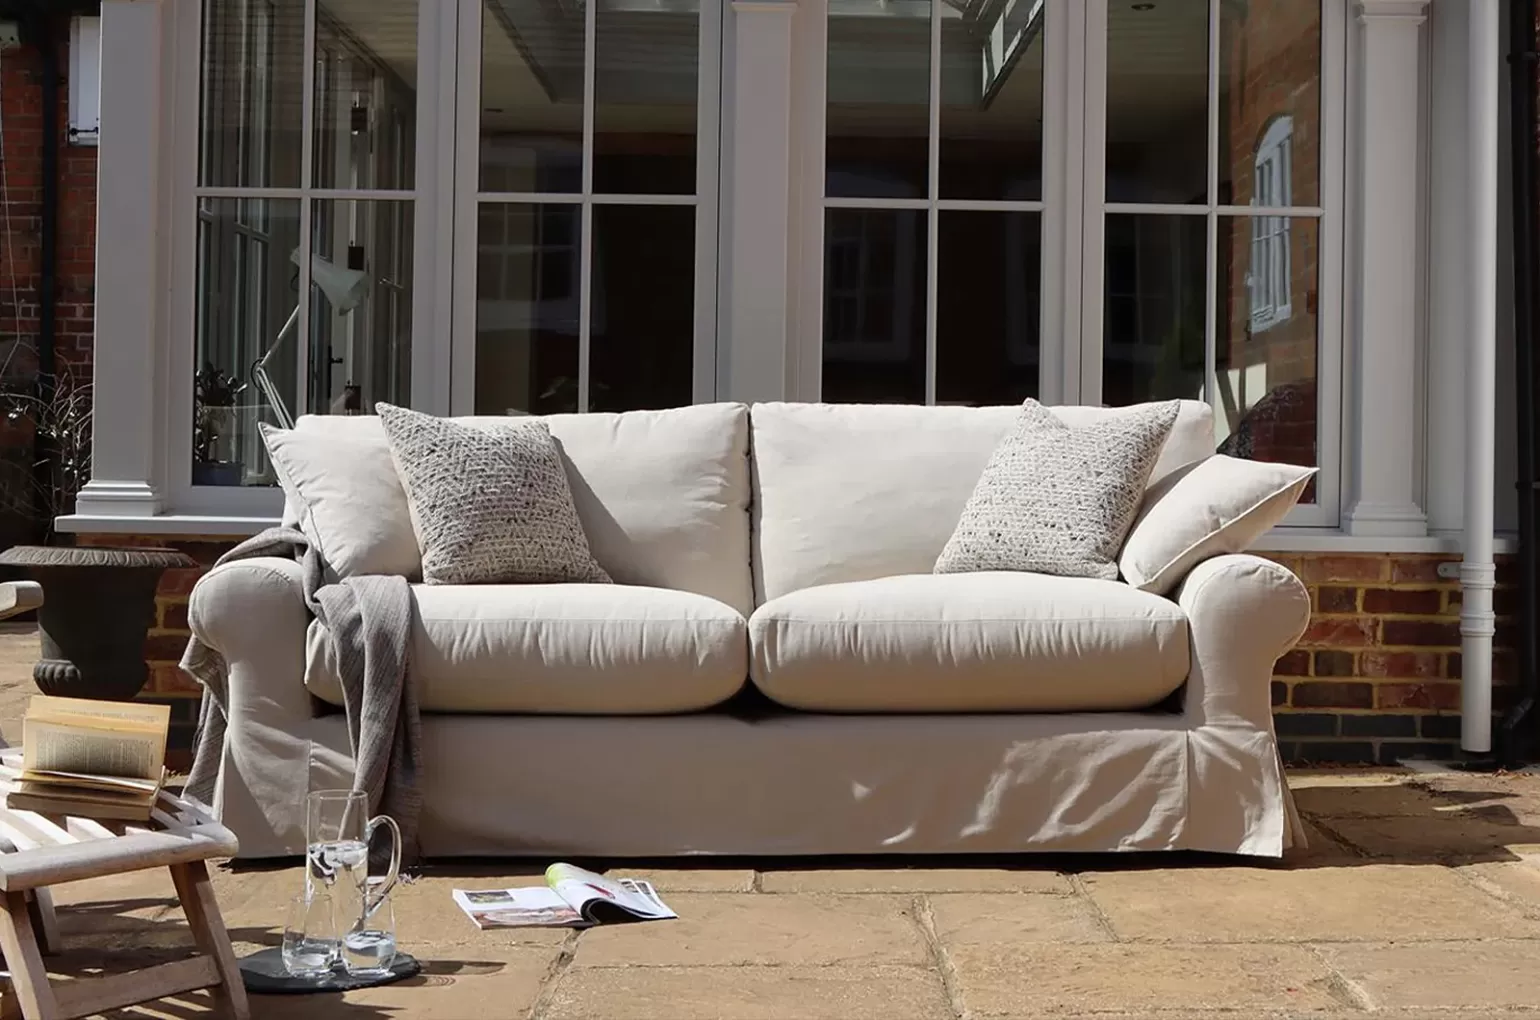 The loose cover collection is the ultimate relaxed look. The loose covers make the sofas easy to wash as well as change when your preferences change. The perfect Shabby Chic look.
